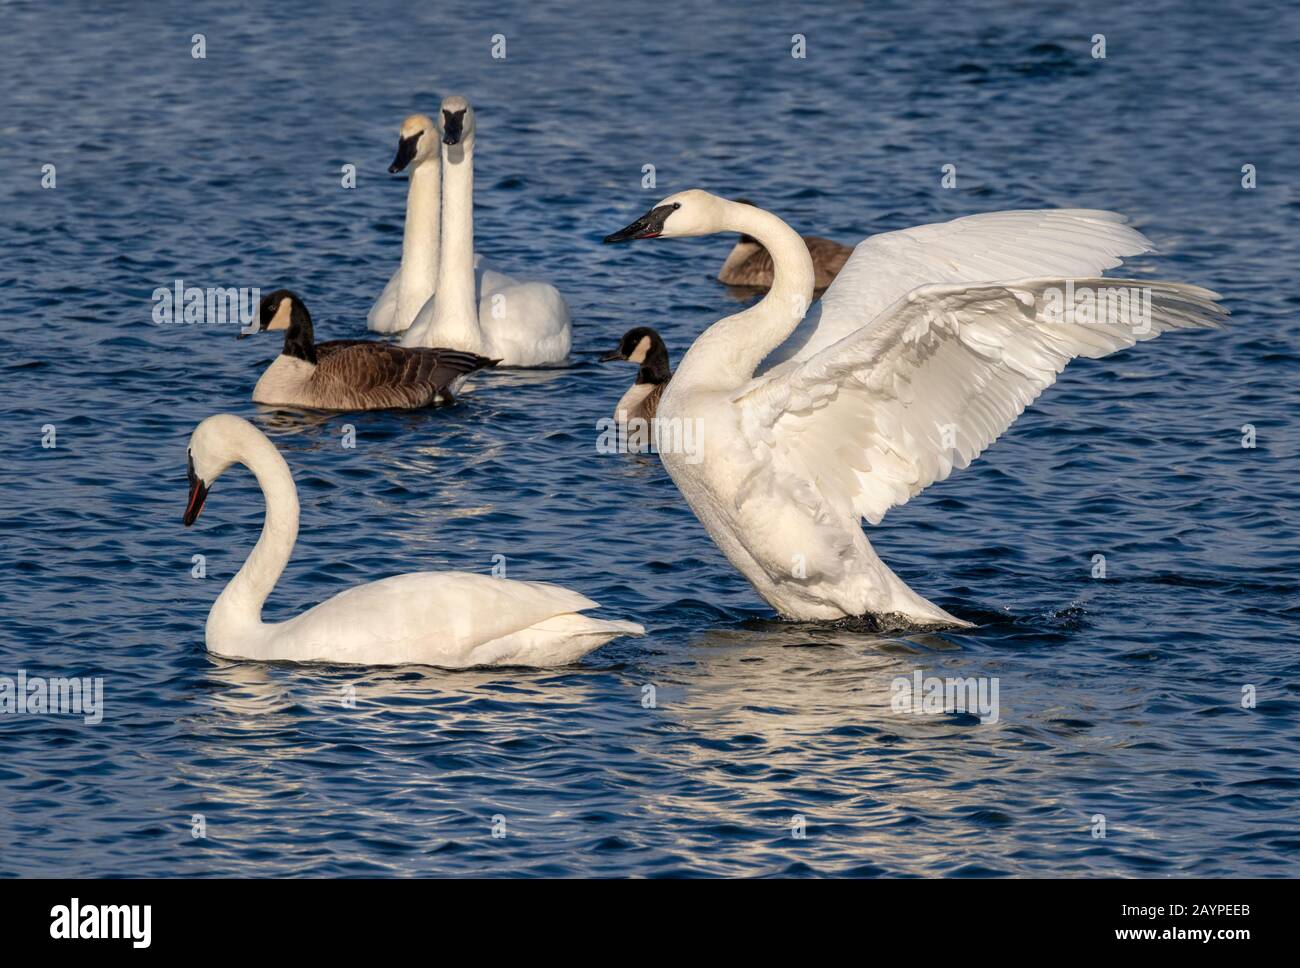 Trumpeter swans (Cygnus buccinator) and canada geese (Branta canadensis) in a lake, Iowa, USA. Stock Photo